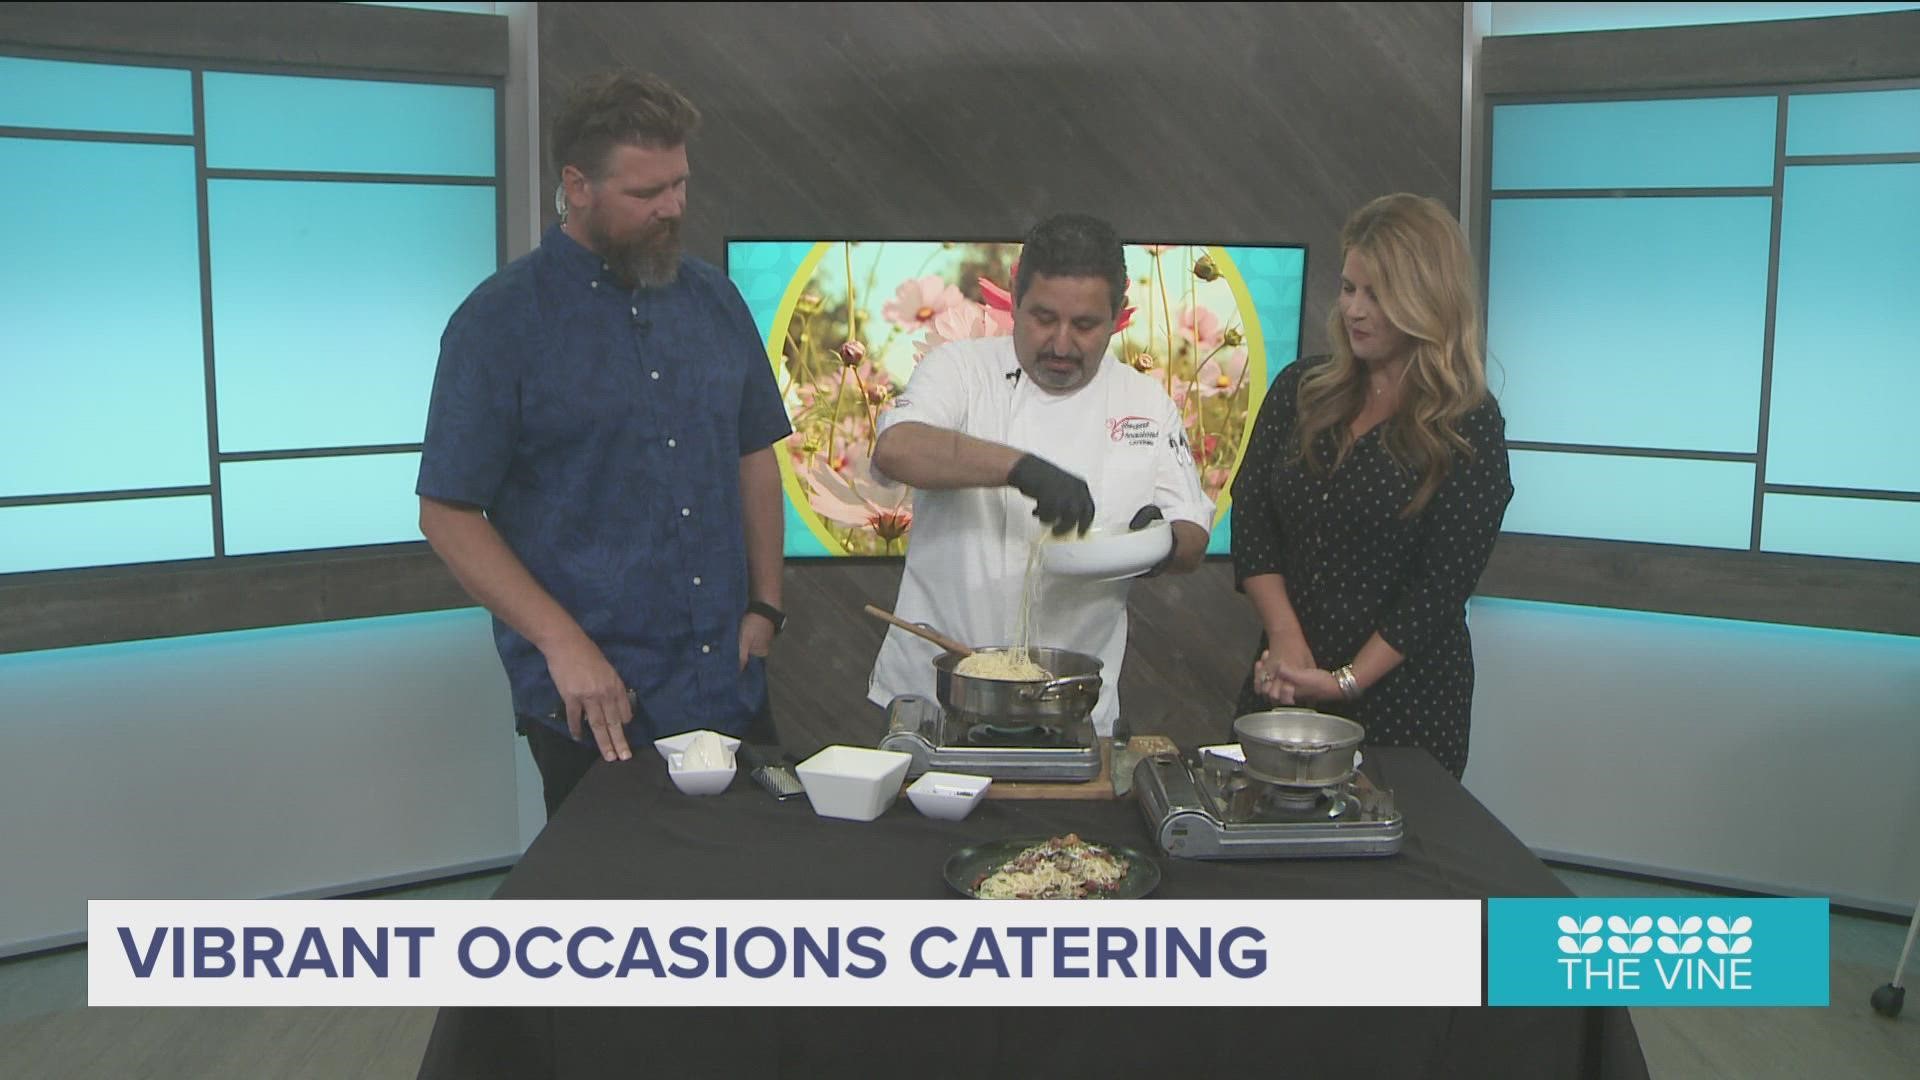 Chef Serge with Vibrant Catering stopped by the studio to whip up something delicious for Adam and Ashley.